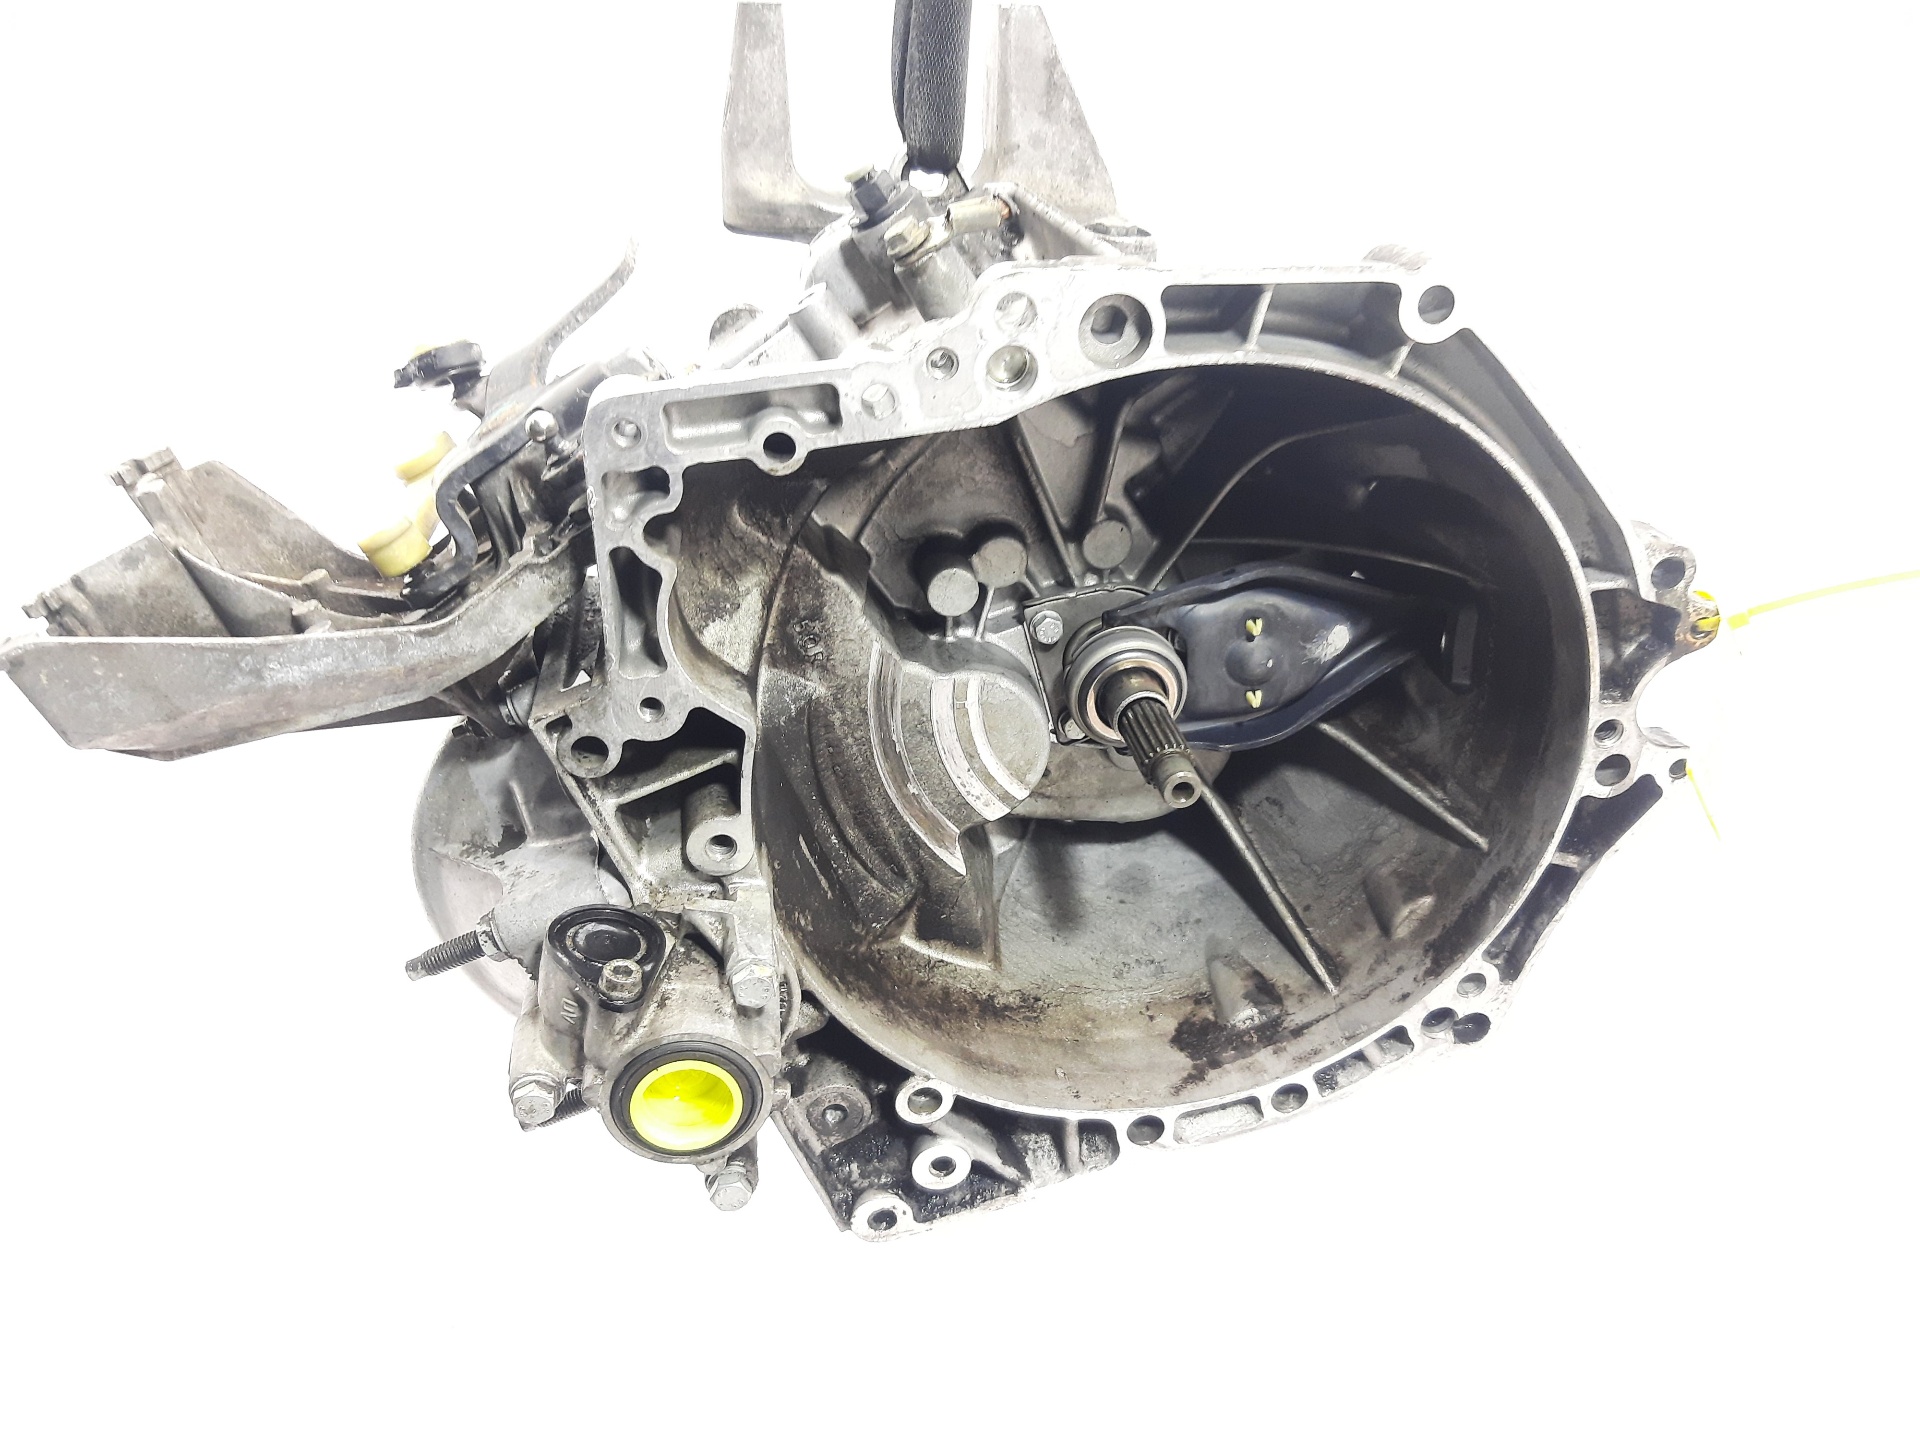 PEUGEOT 407 1 generation (2004-2010) Gearbox 20DM65, 5VELOCIDADES 23856401